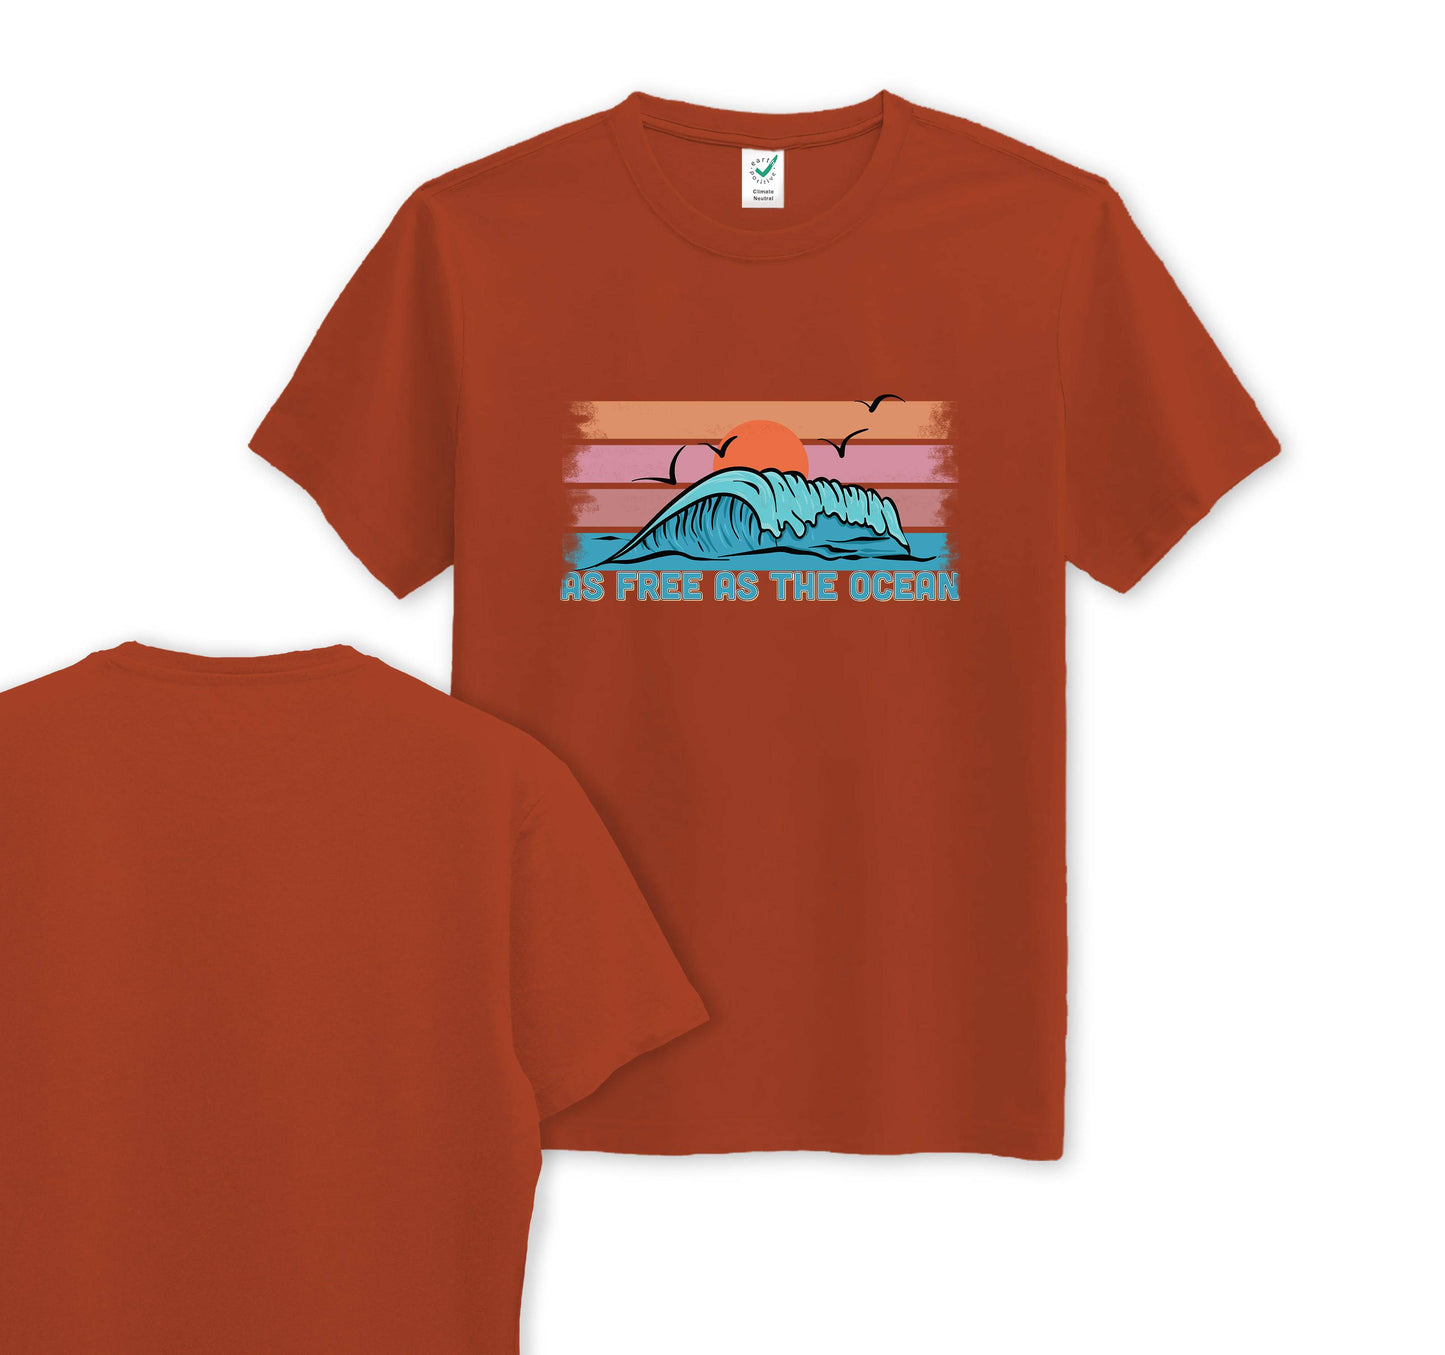 As Free As The Ocean - Organic Cotton Tee - Front Print - One Choice Apparel